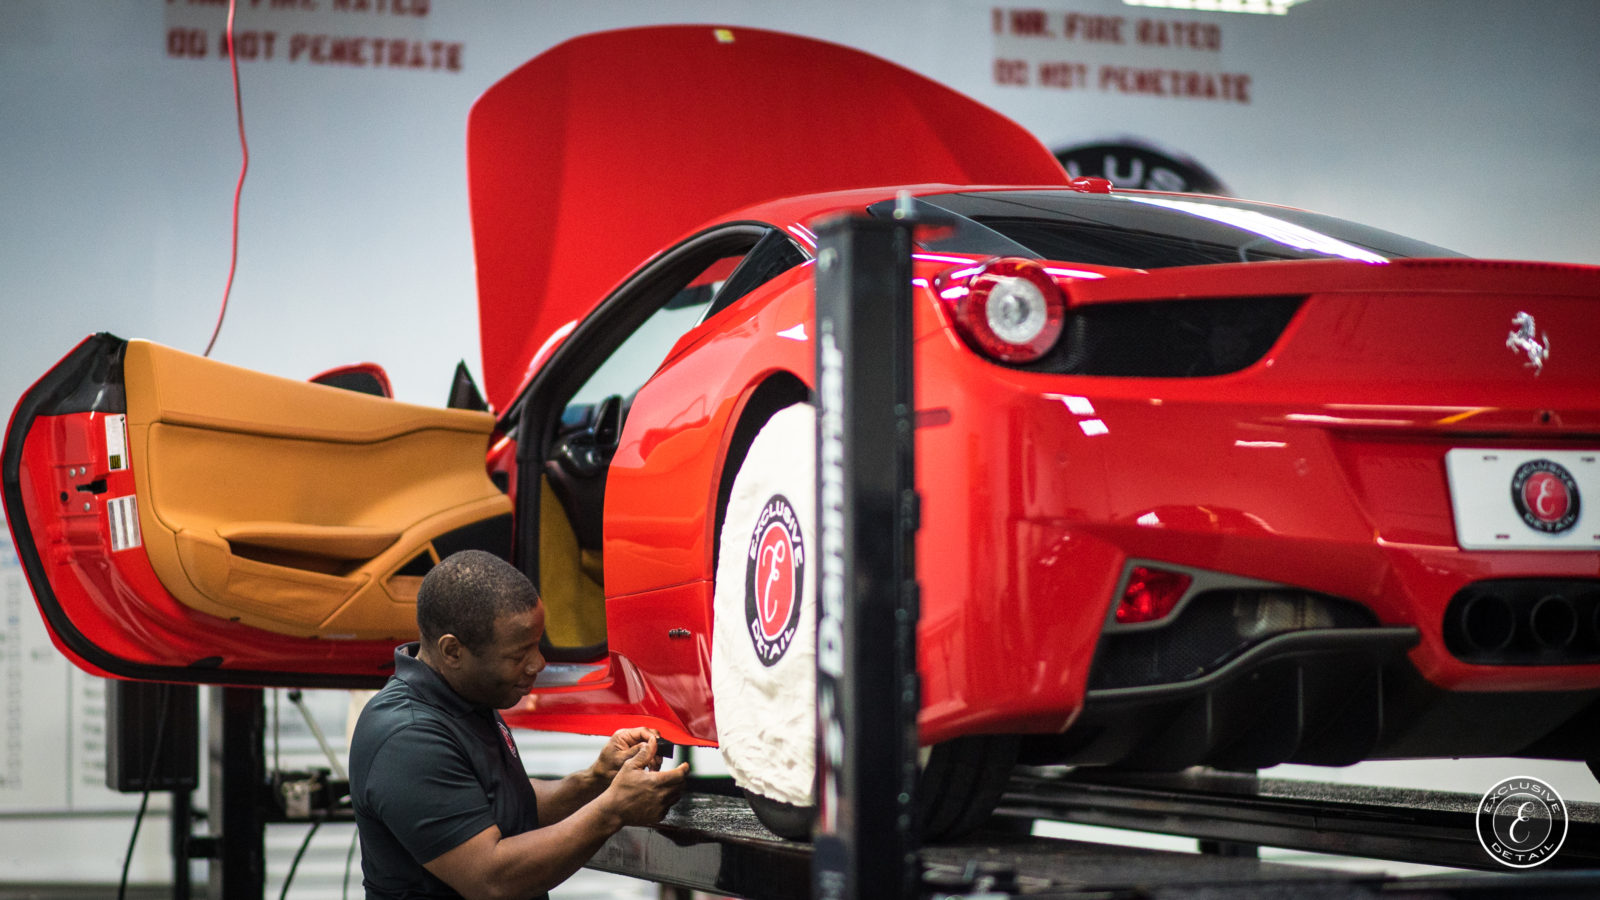 How Much Does a Paint Protection Film Installation Cost?